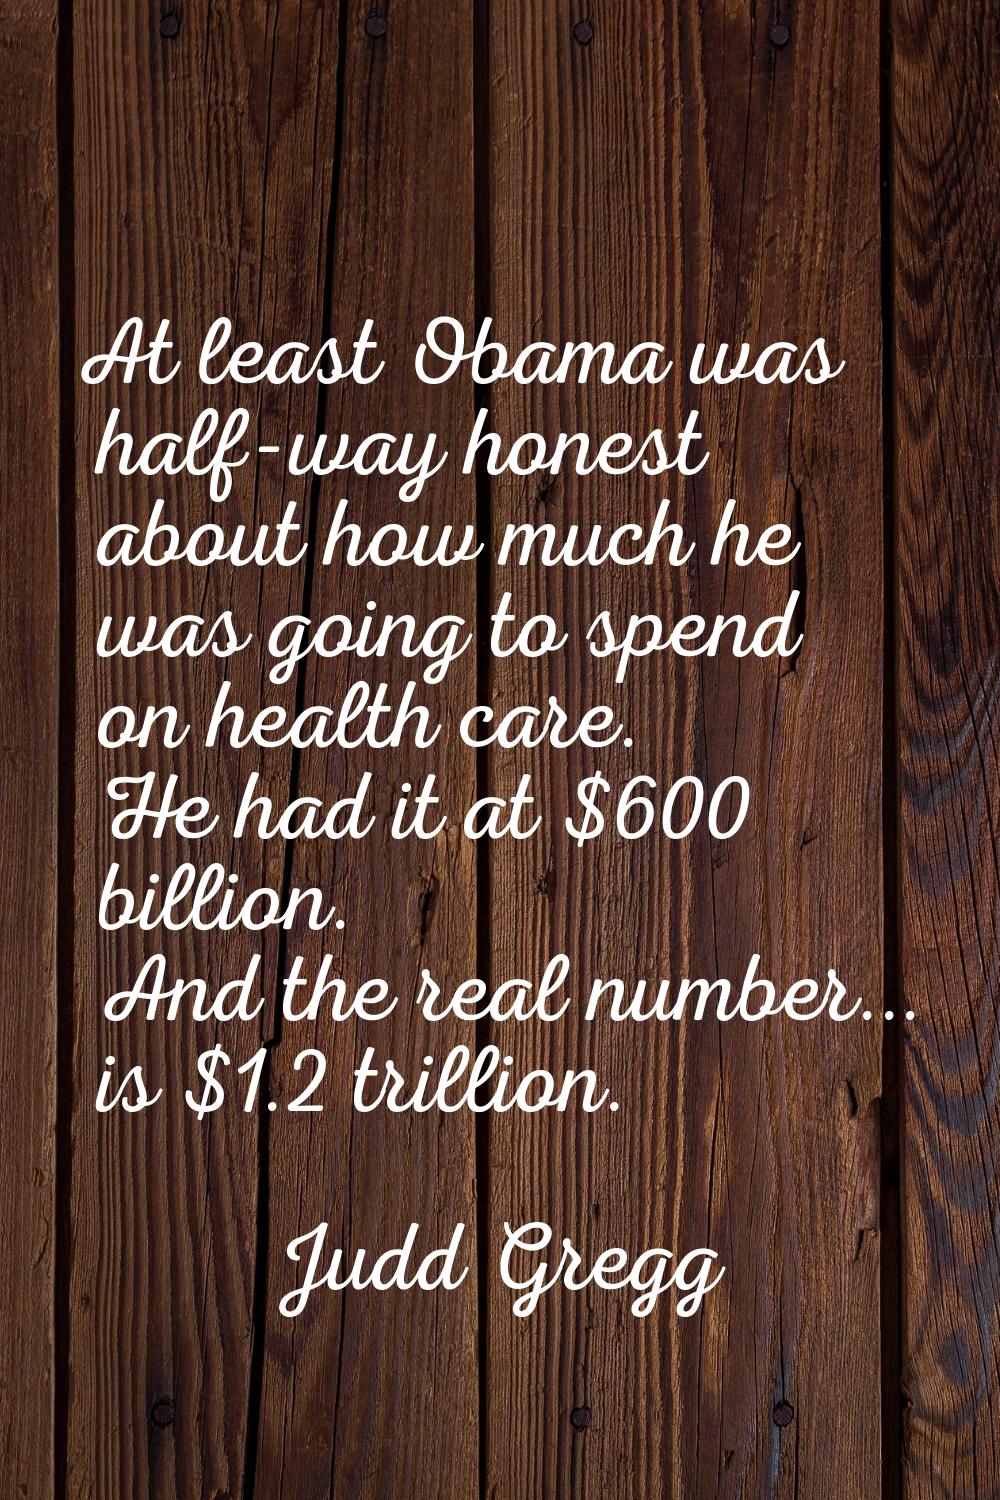 At least Obama was half-way honest about how much he was going to spend on health care. He had it a